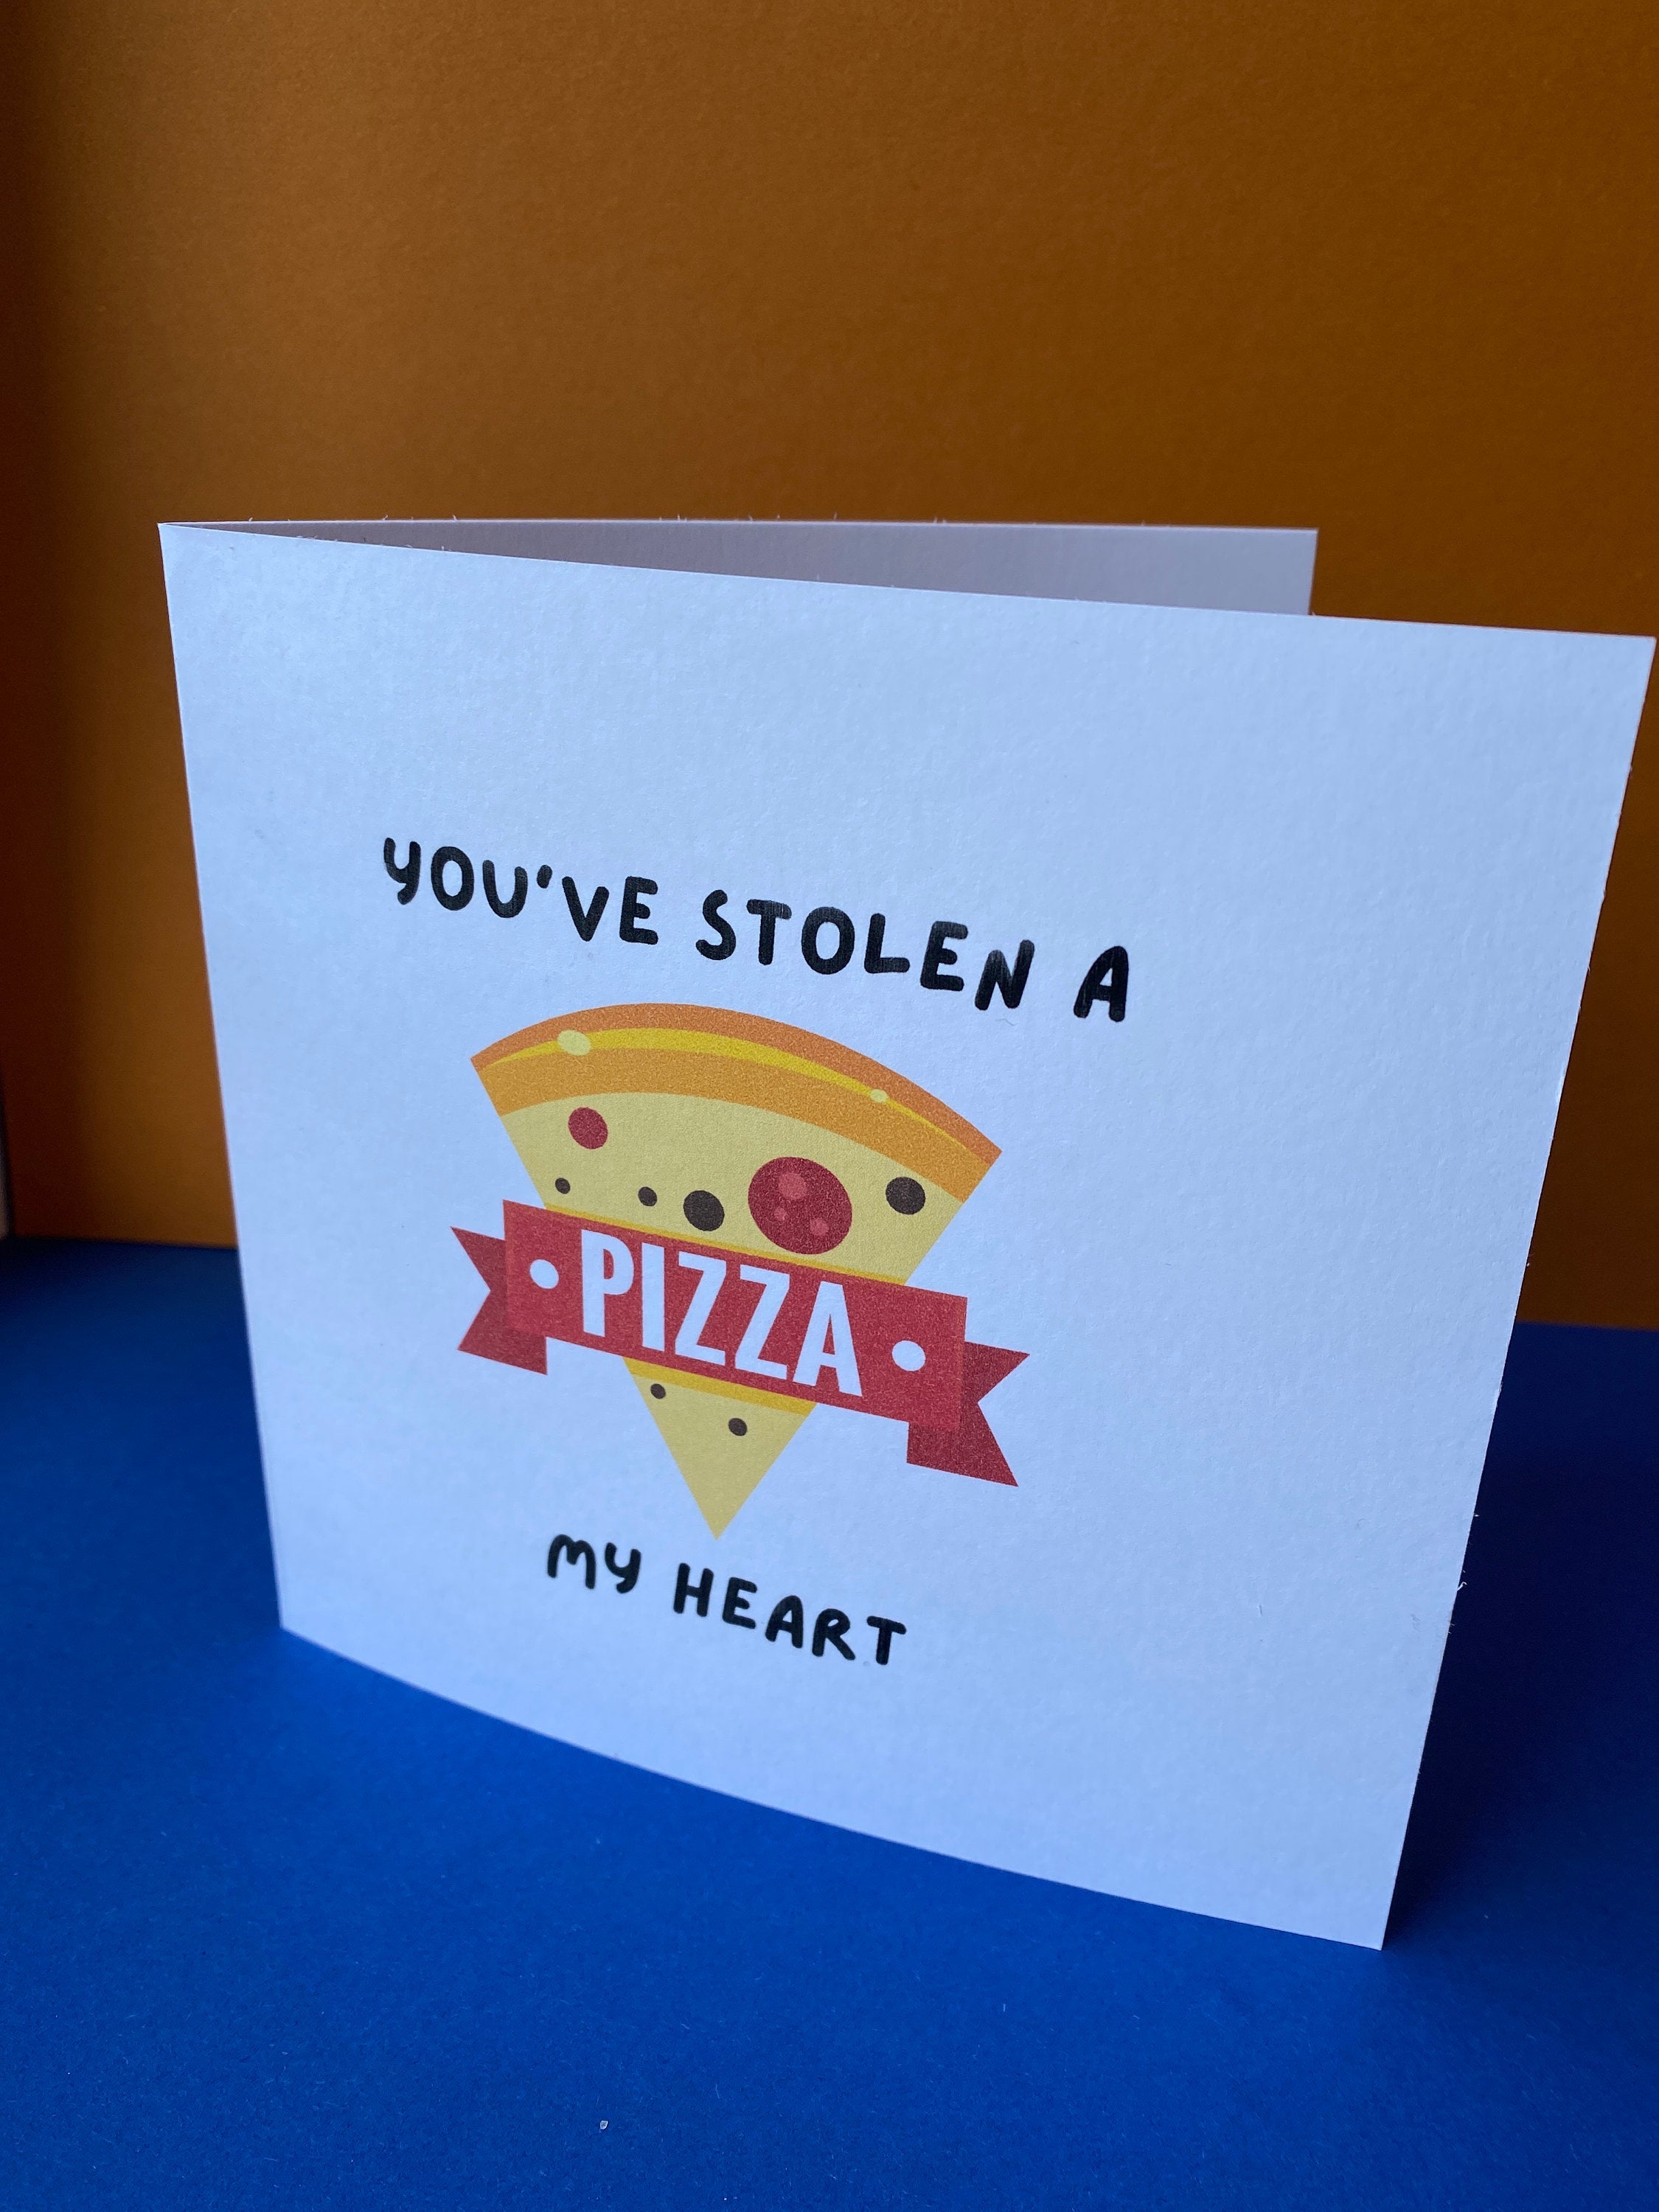 Valentines Card “you’ve stolen a pizza my heart”